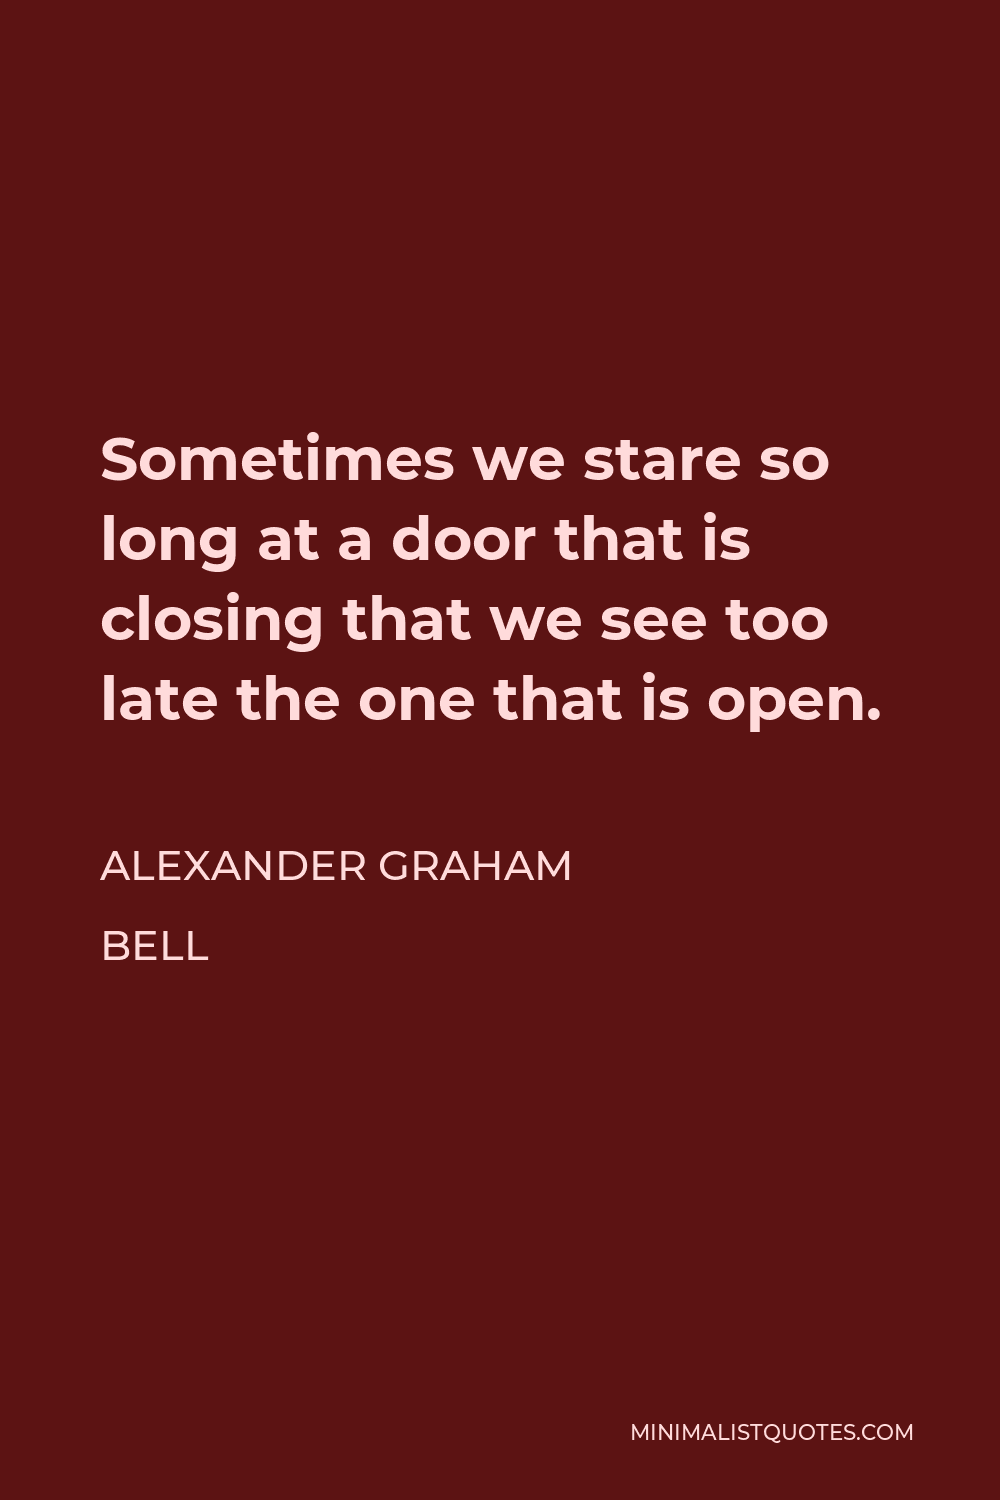 Alexander Graham Bell Quote - Sometimes we stare so long at a door that is closing that we see too late the one that is open.